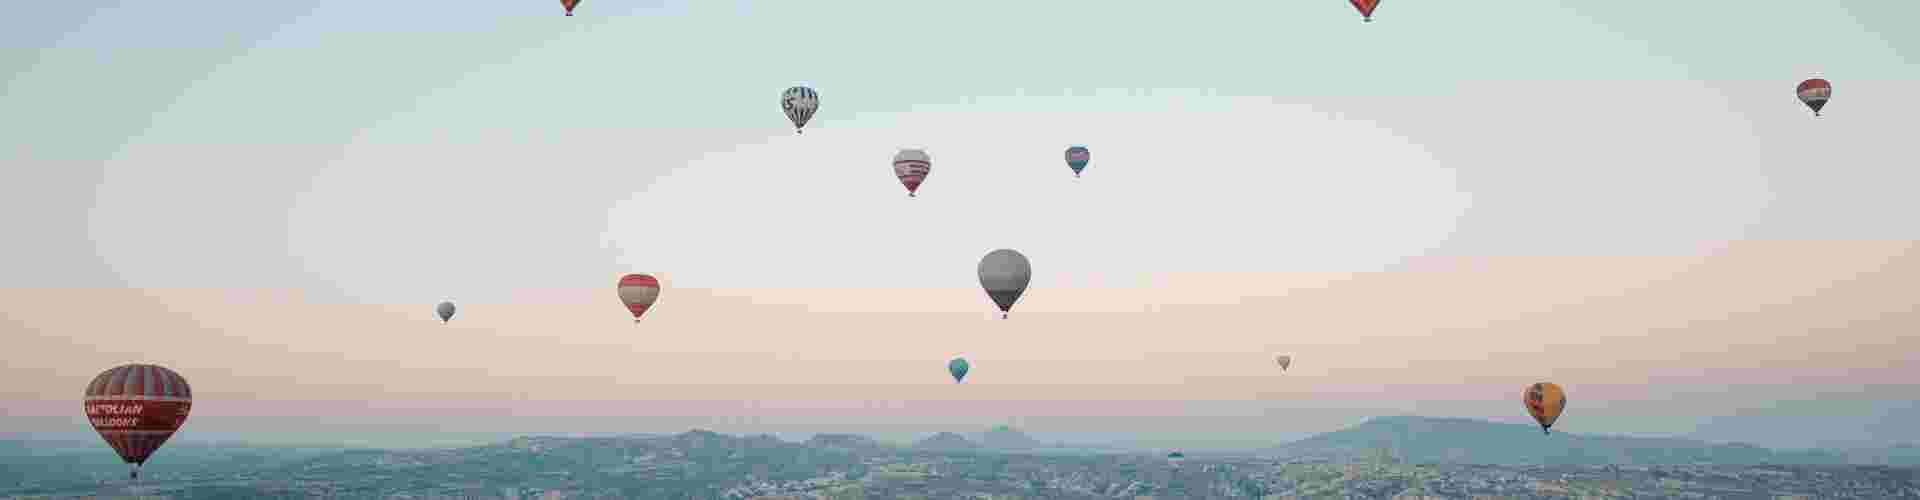 A collection of hot air balloons flying at sunrise in Cappadocia, Turkey